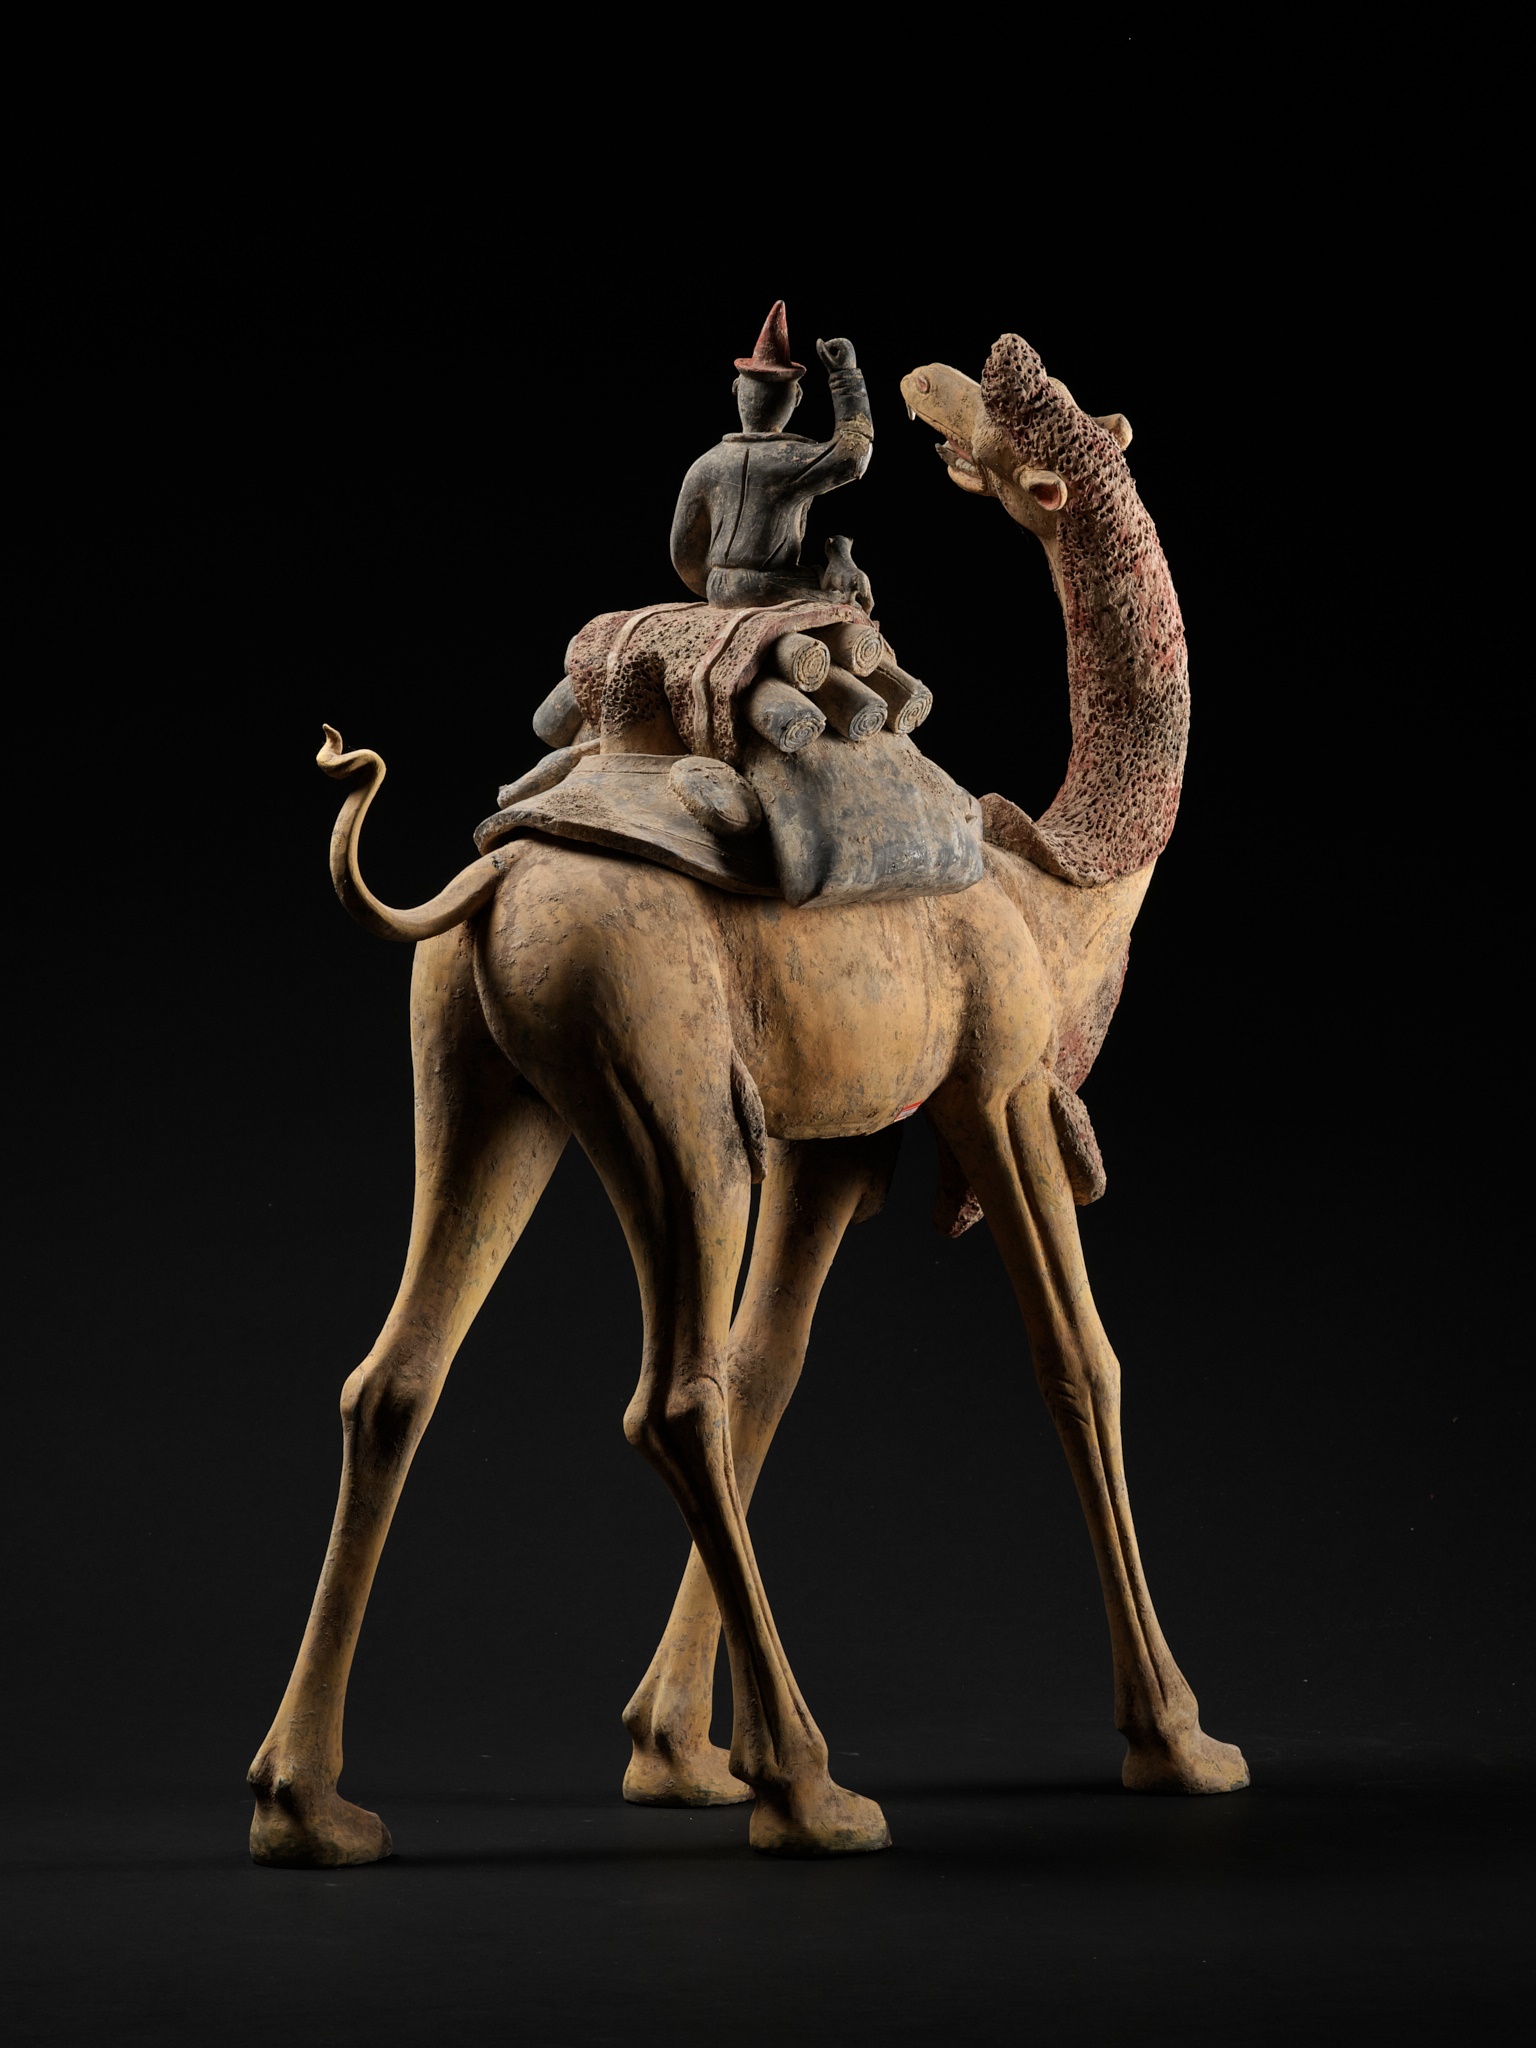 AN EXCEPTIONALLY LARGE PAINTED POTTERY FIGURE OF A BACTRIAN CAMEL AND A SOGDIAN RIDER, TANG DYNASTY - Image 11 of 12